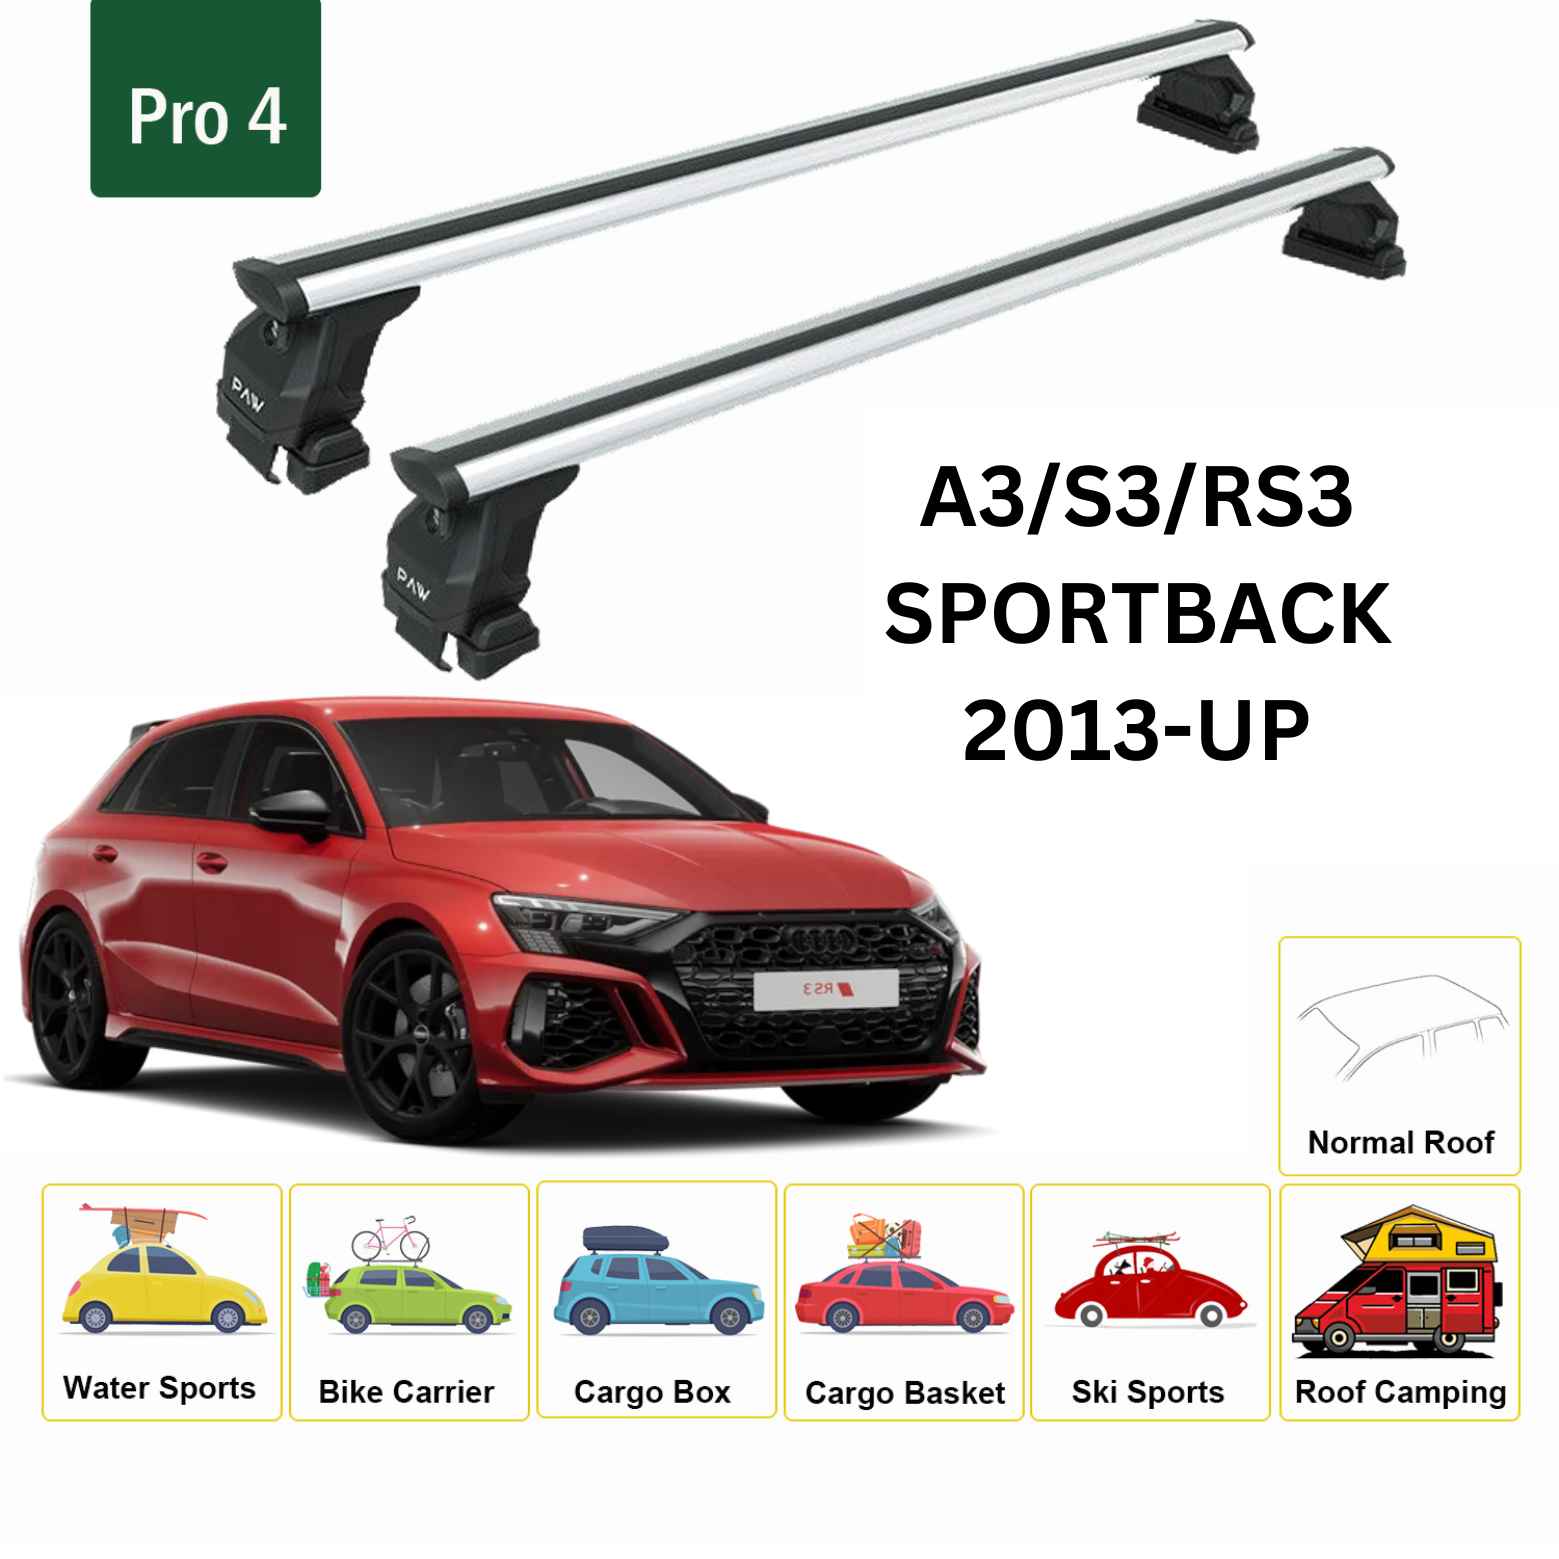 For Audi A3/S3/RS3 Sportback 2013-Up Roof Rack Cross Bars Normal Roof Alu Silver